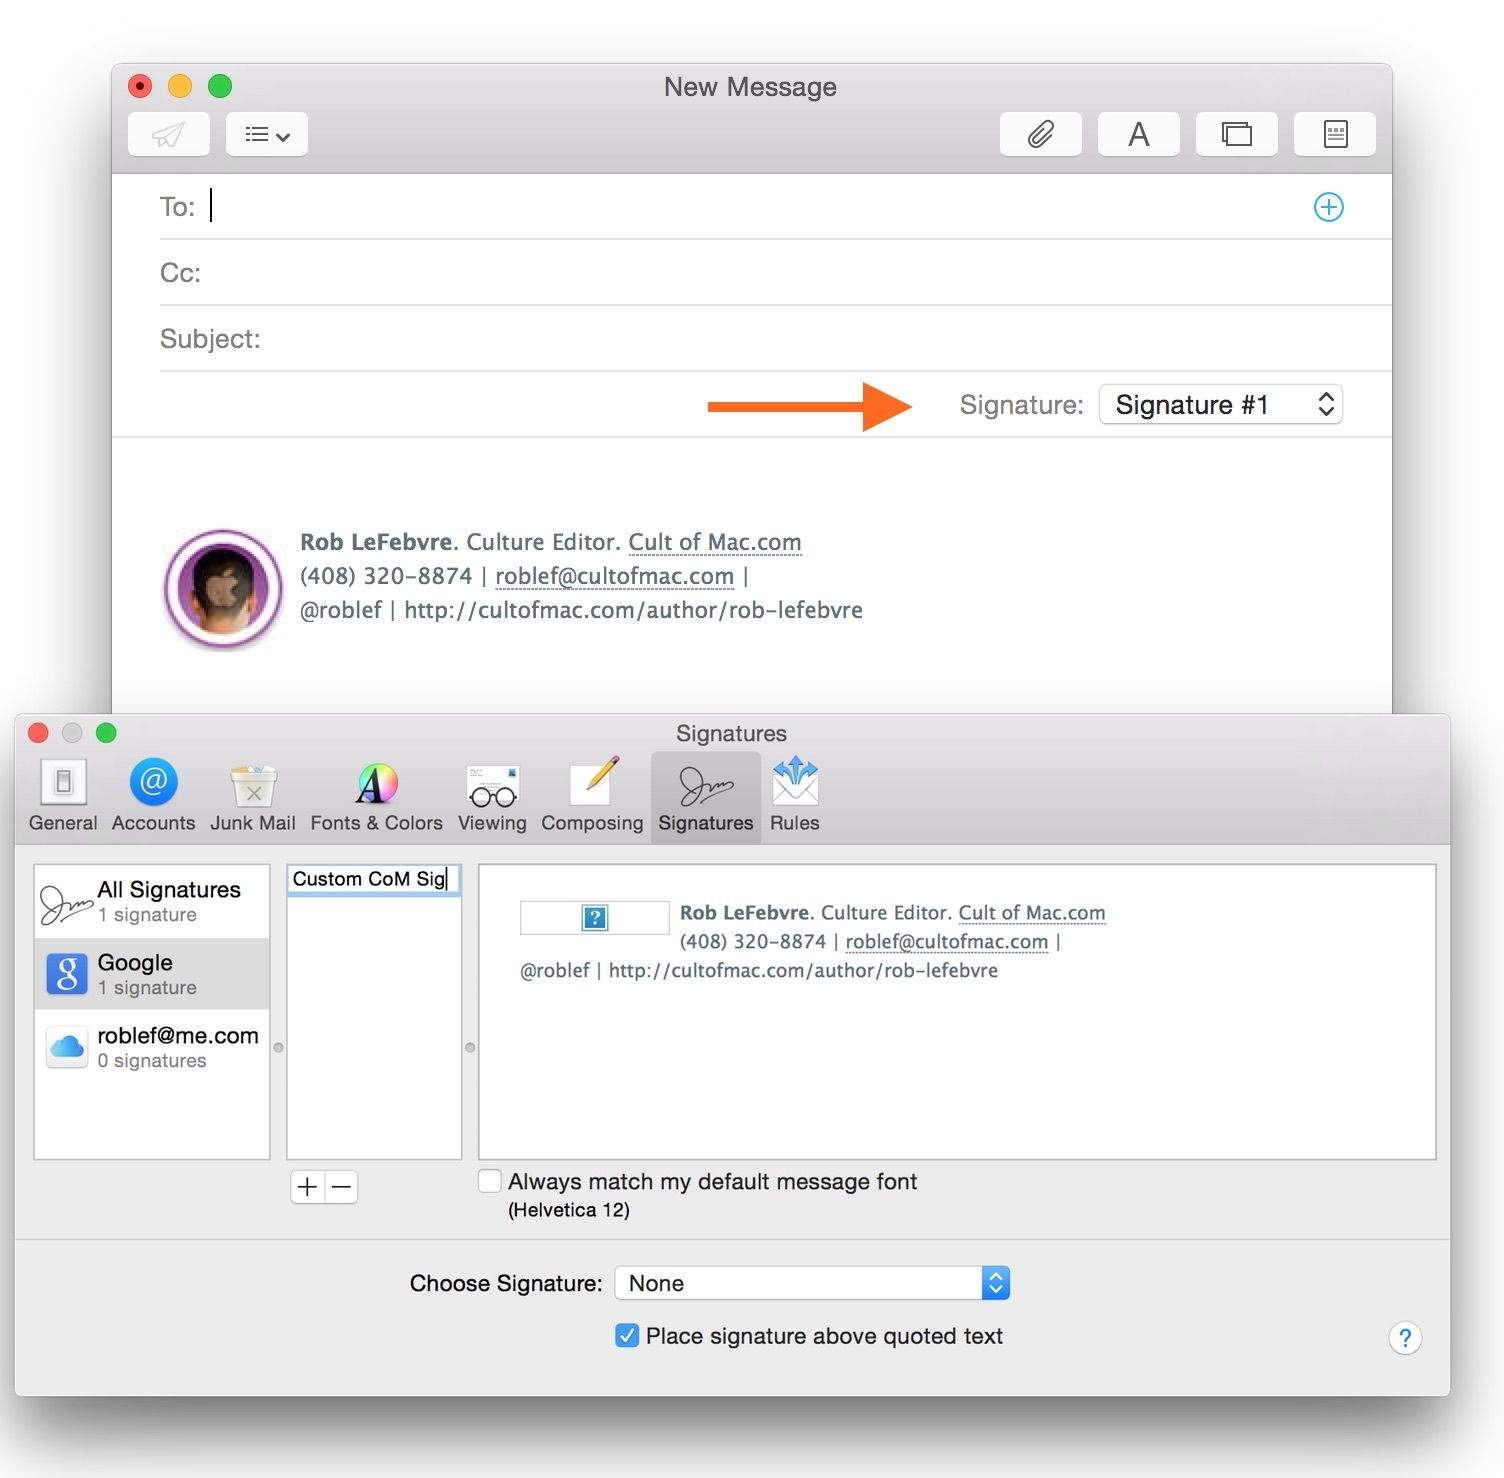 How To Add Links To Signatures In Mac OS X Mail Or MacOS Mail